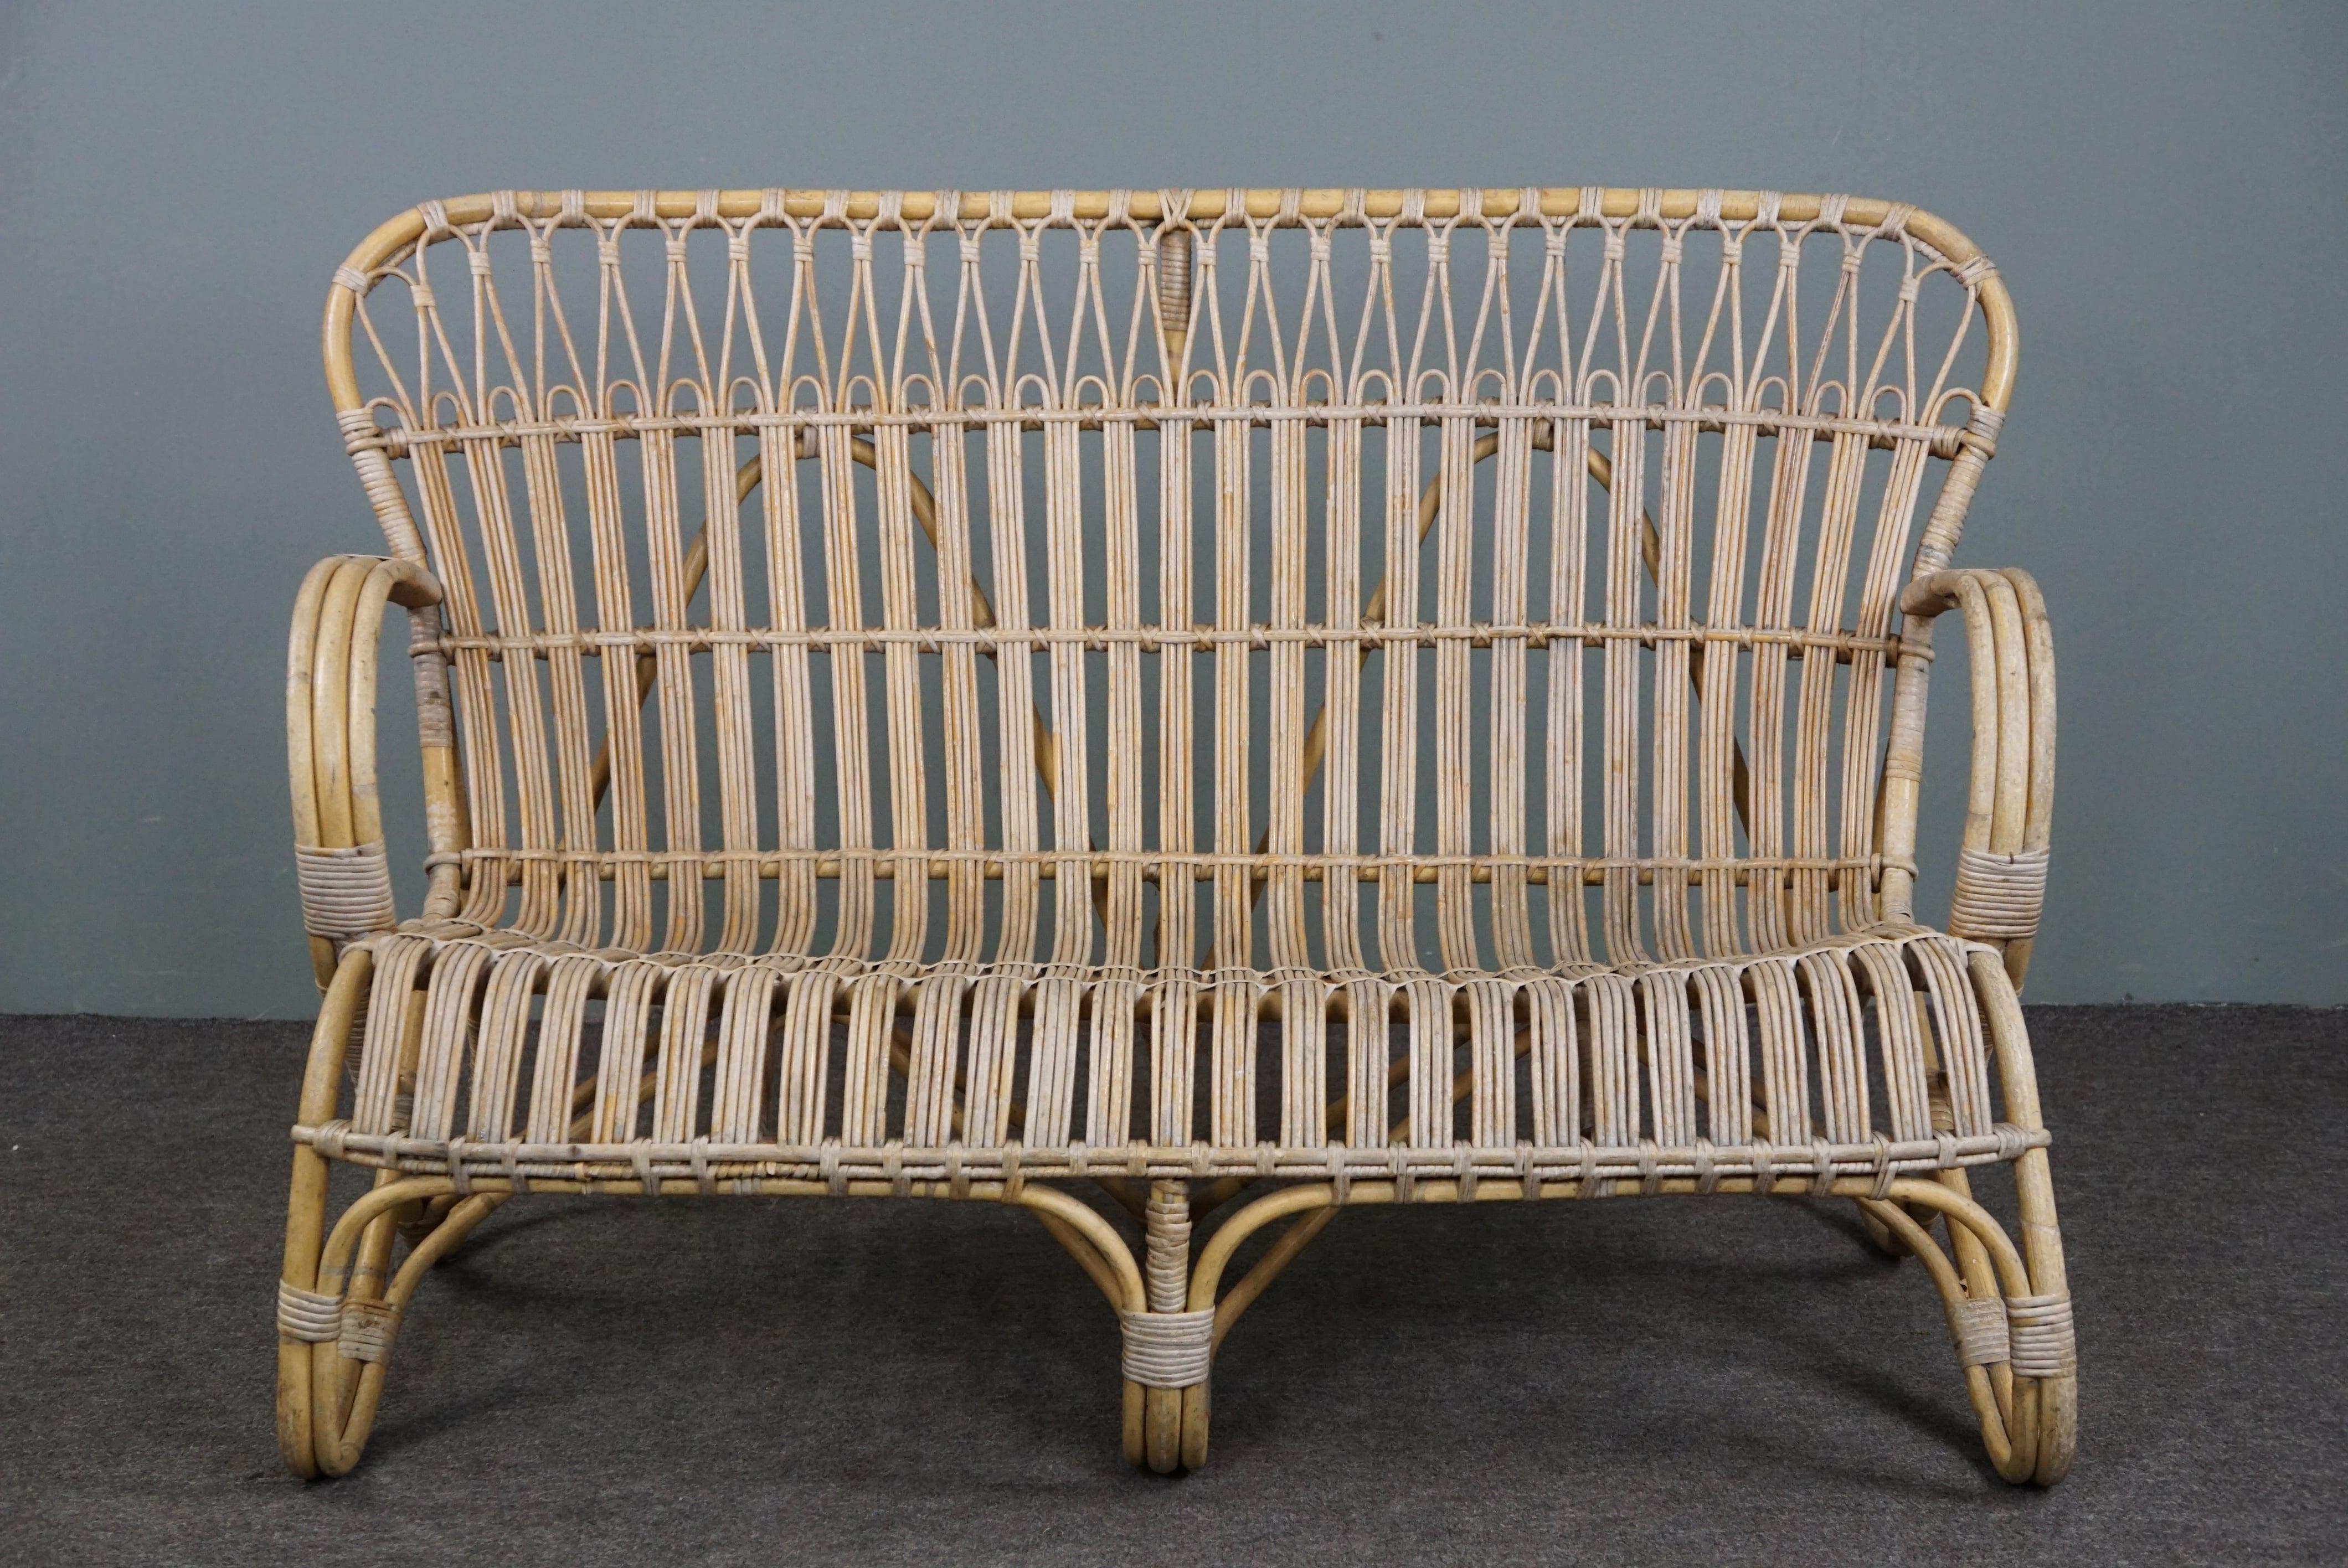 Offered is this unique and very rare, beautifully designed Dutch Design 2-seater sofa made in the 1950s in the Netherlands.

This rattan Belse 8, 2-seater sofa is in good condition and has a timeless design, a beautifully shaped and ergonomic back